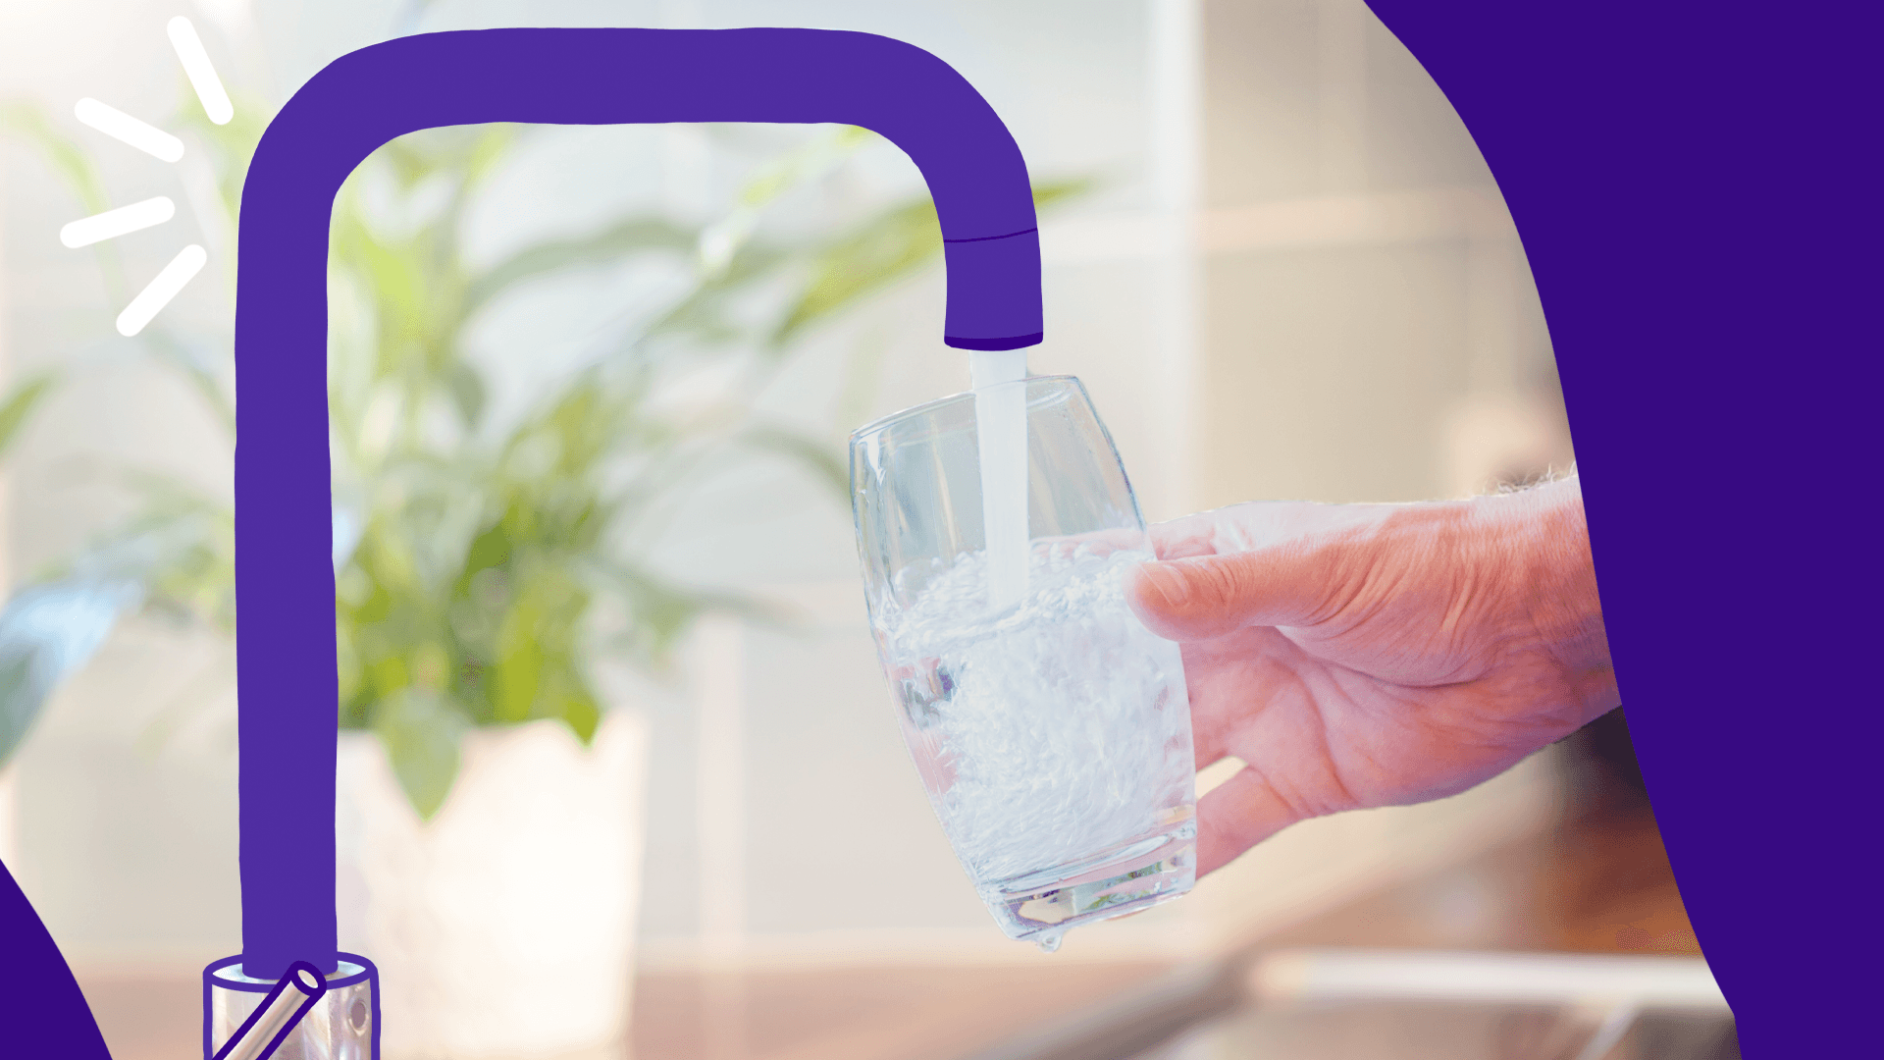 A person filling a glass of water represents the benefits of drinking water